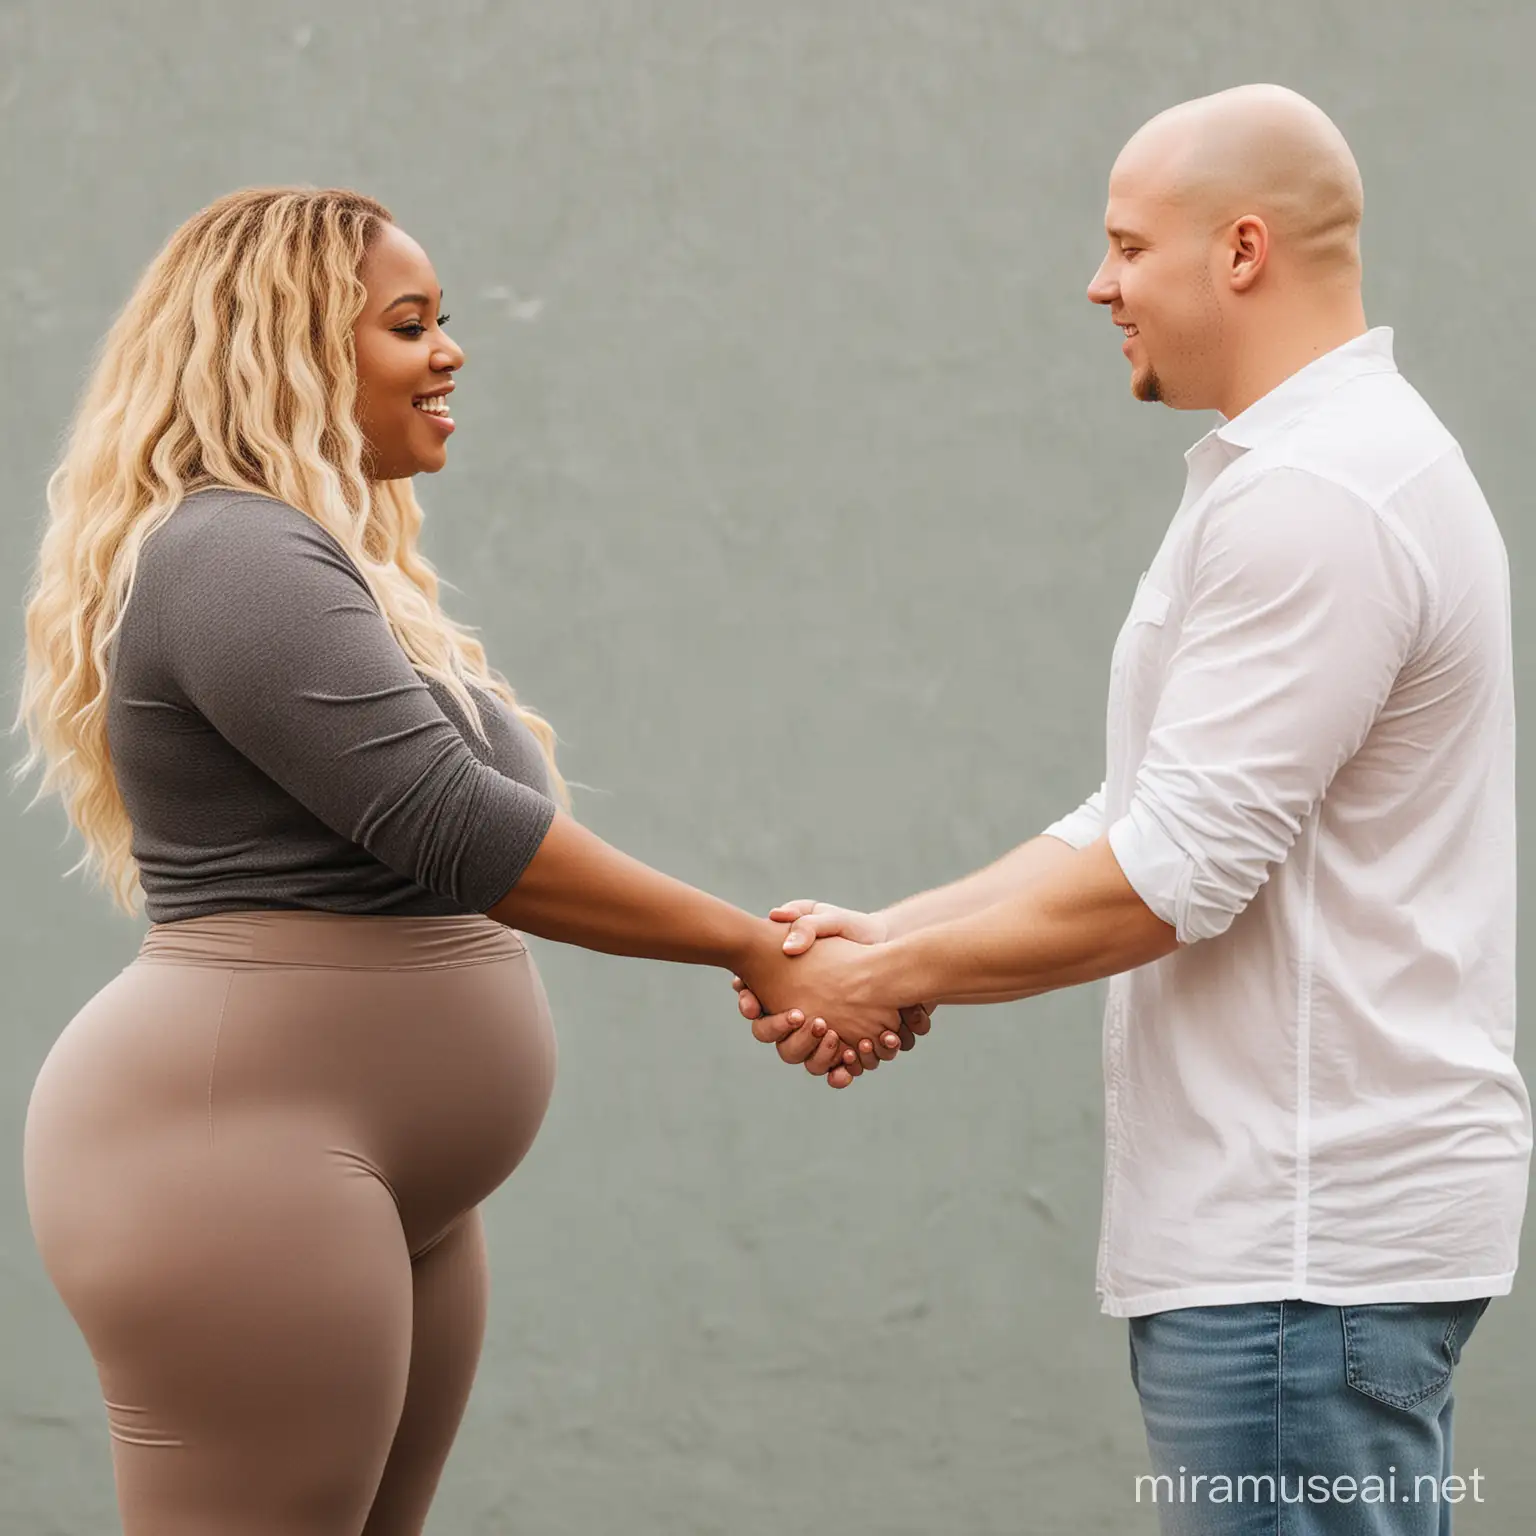 Diverse Couple in Love Black Woman with Blonde Hair and Bald White Fitness Enthusiast Holding Hands